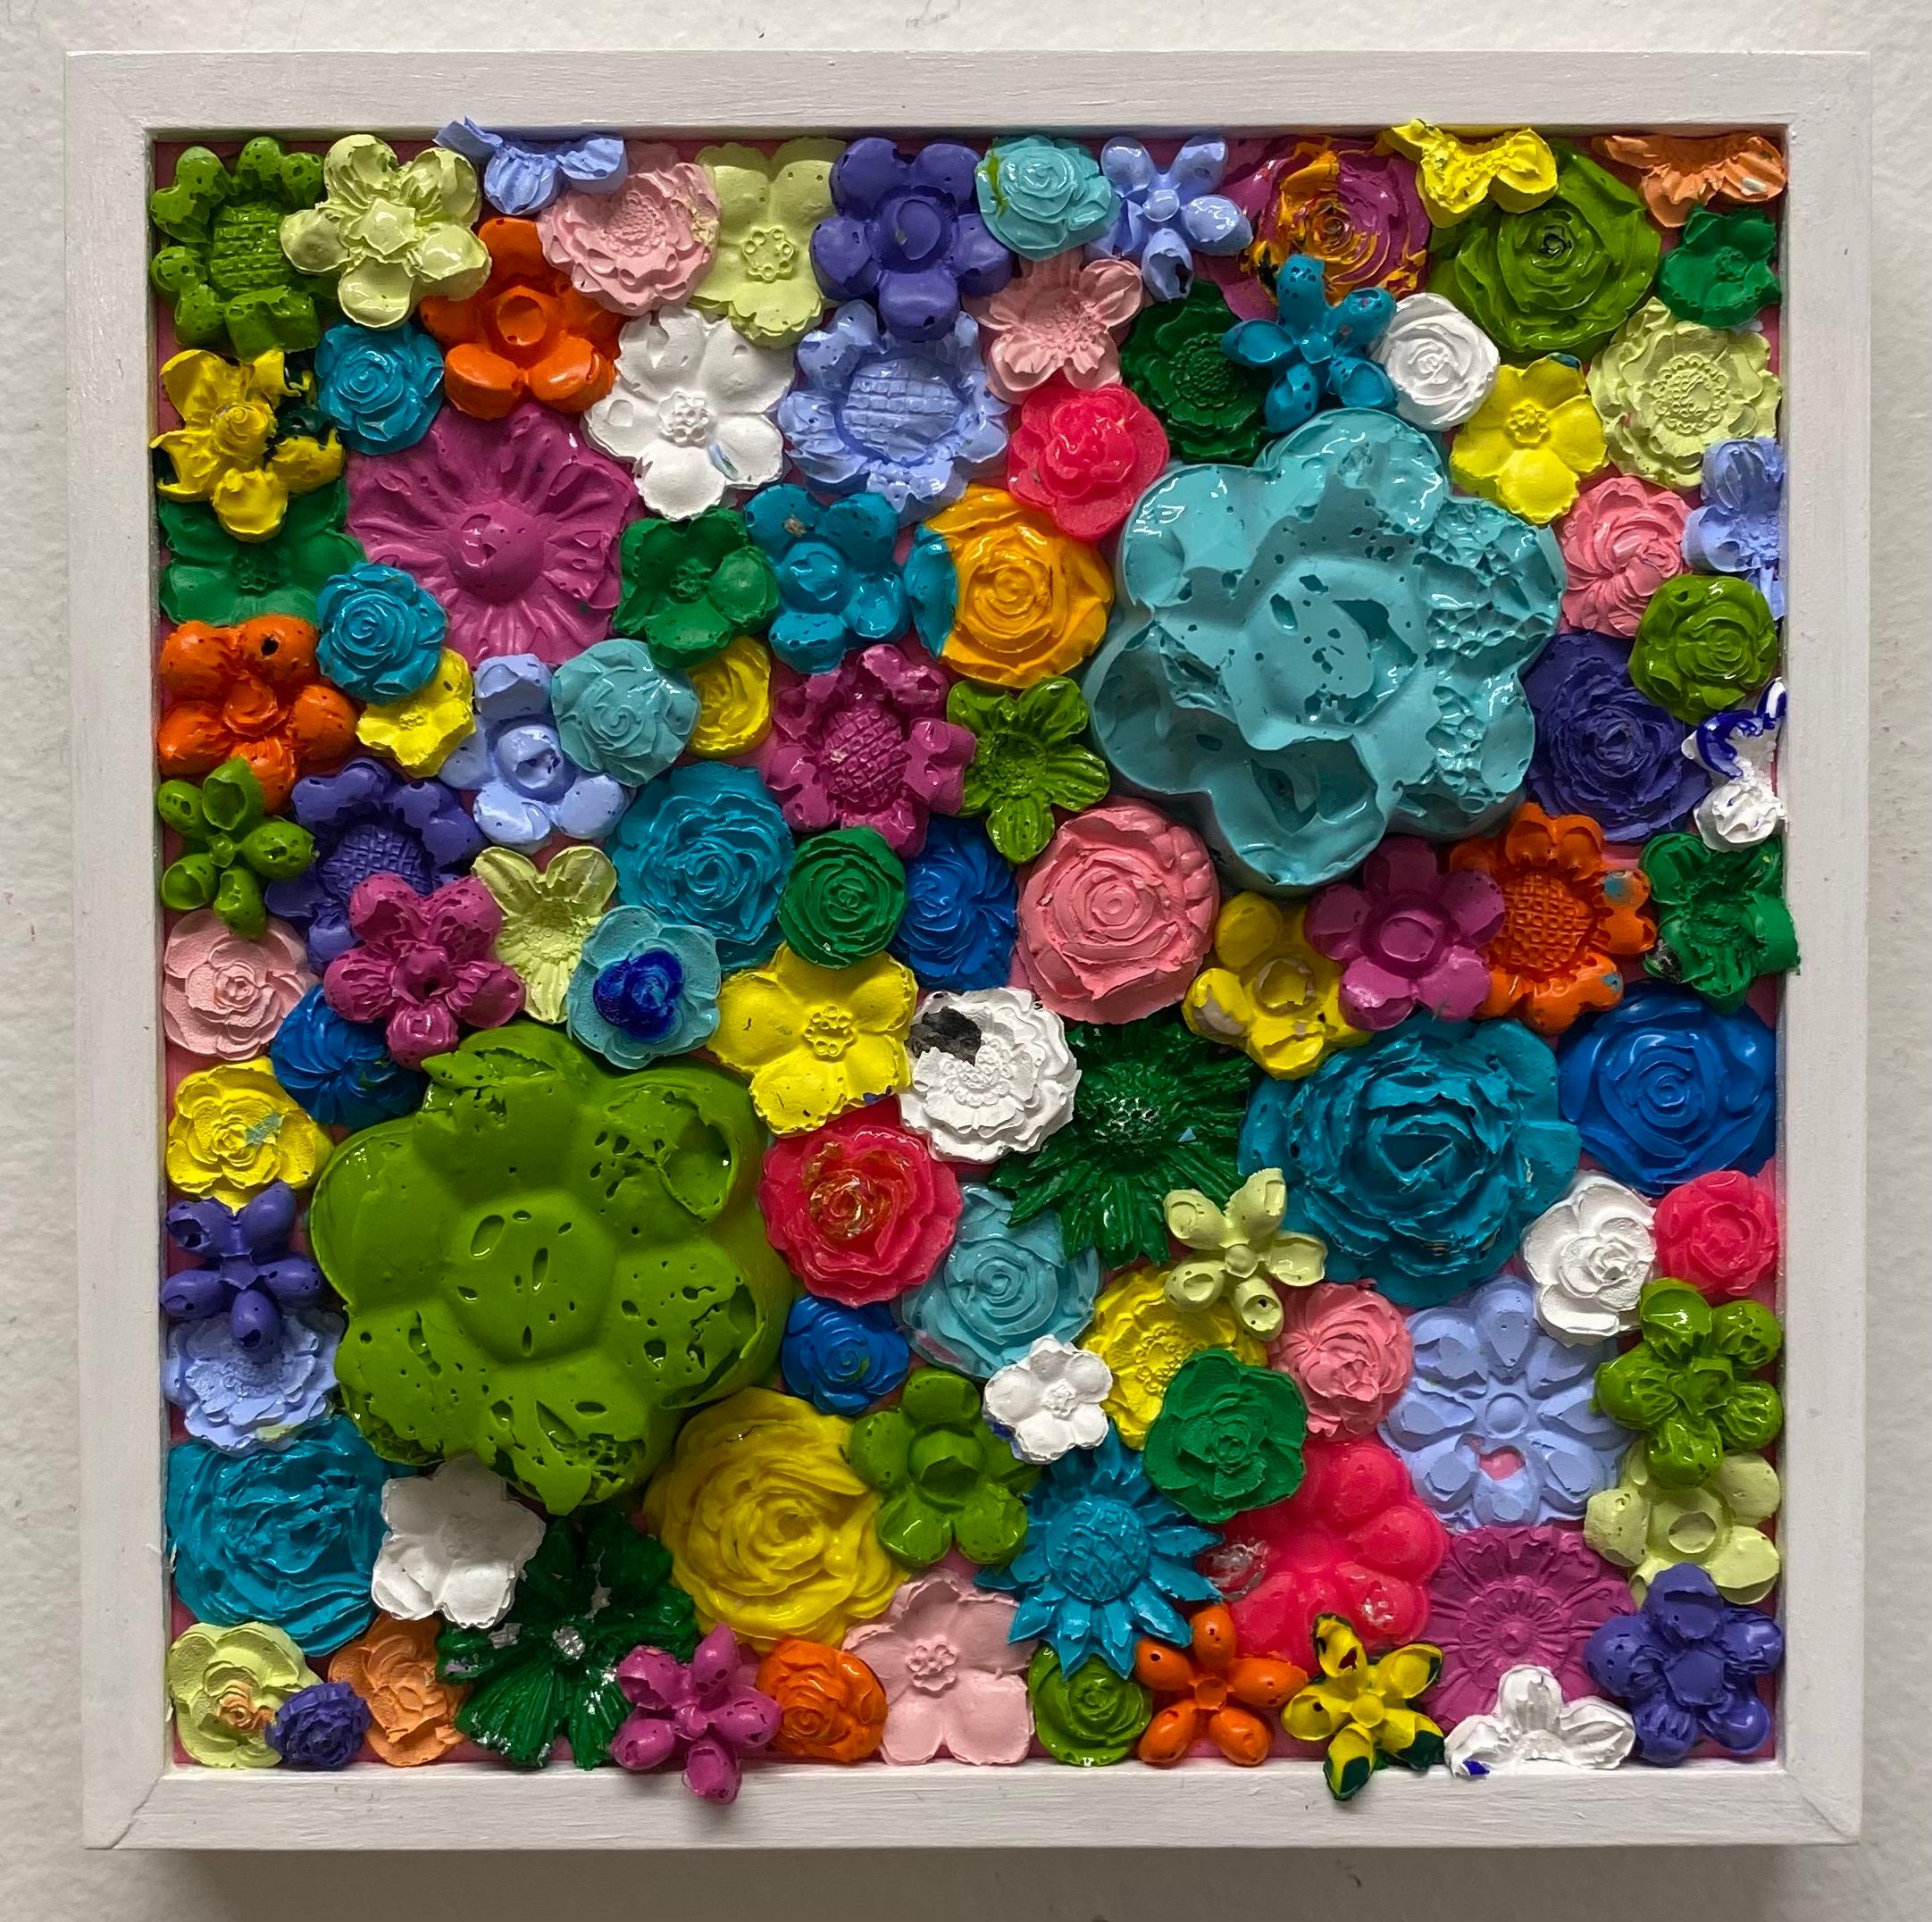 FLOWER TAPESTRY 2 - Framed, Textured, Sculptural, Molded Acrylic Painting